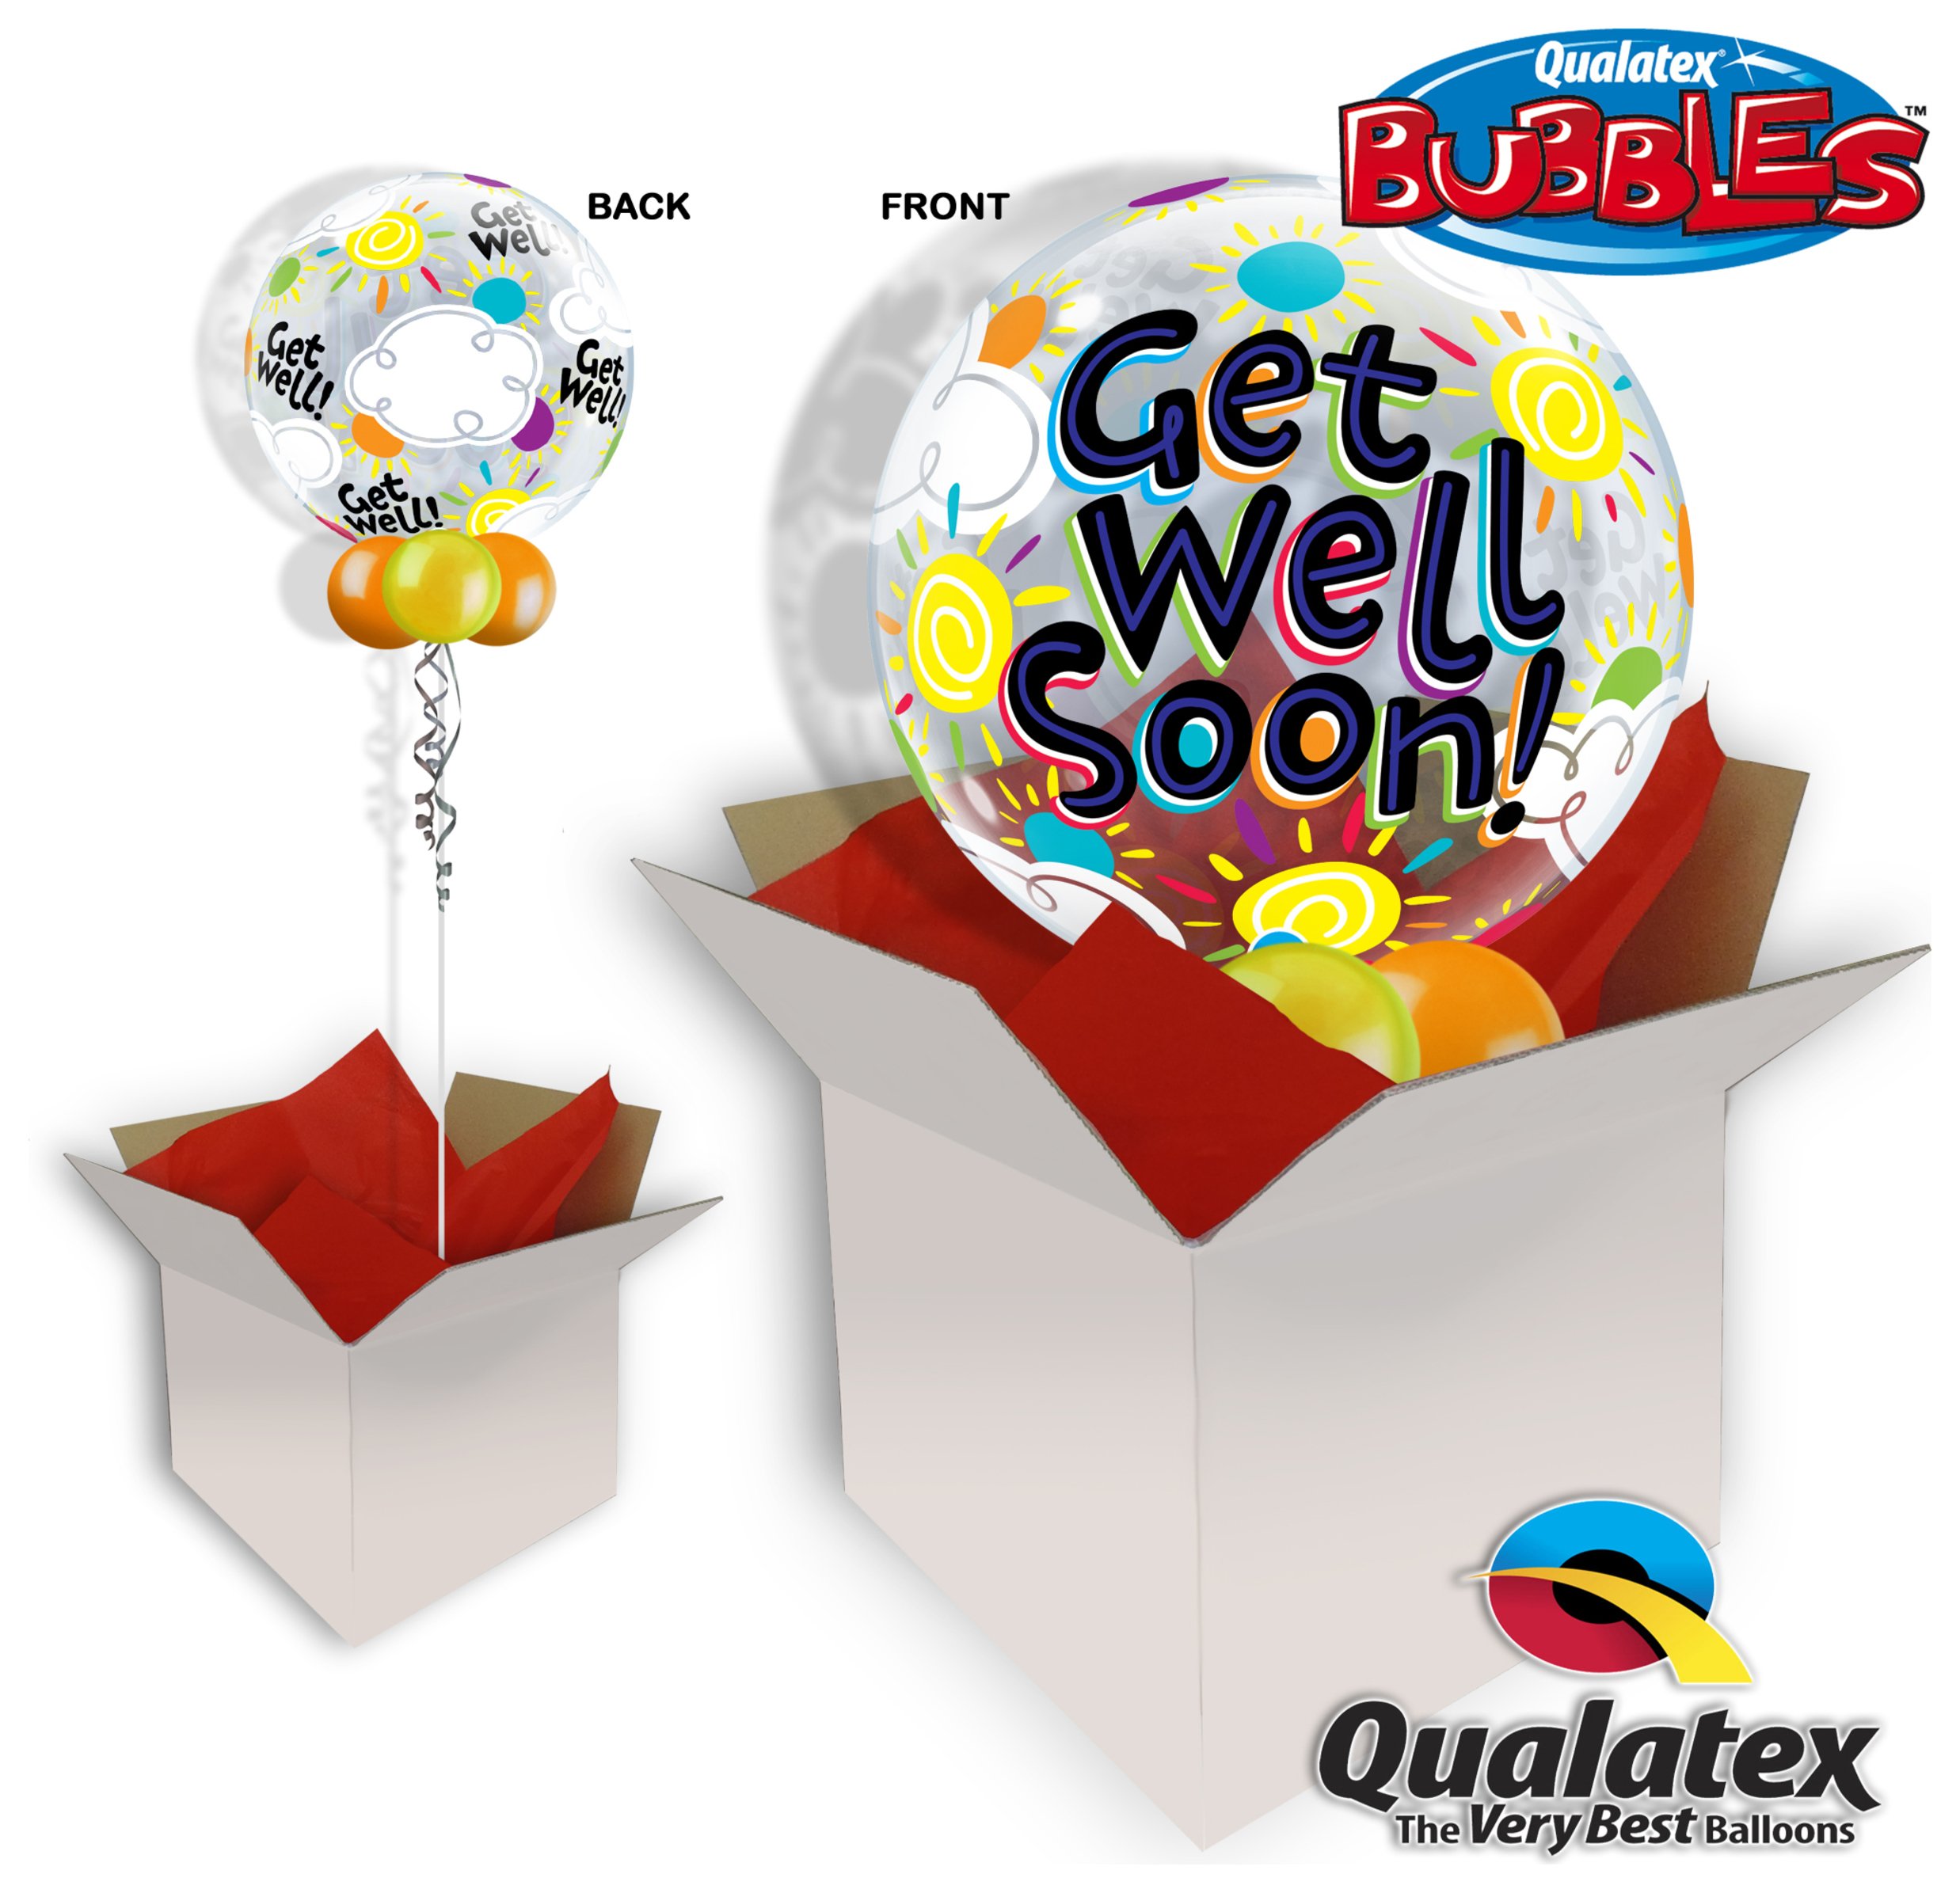 Get Well Soon Sunny 22 Inch Bubble Balloon In A Box